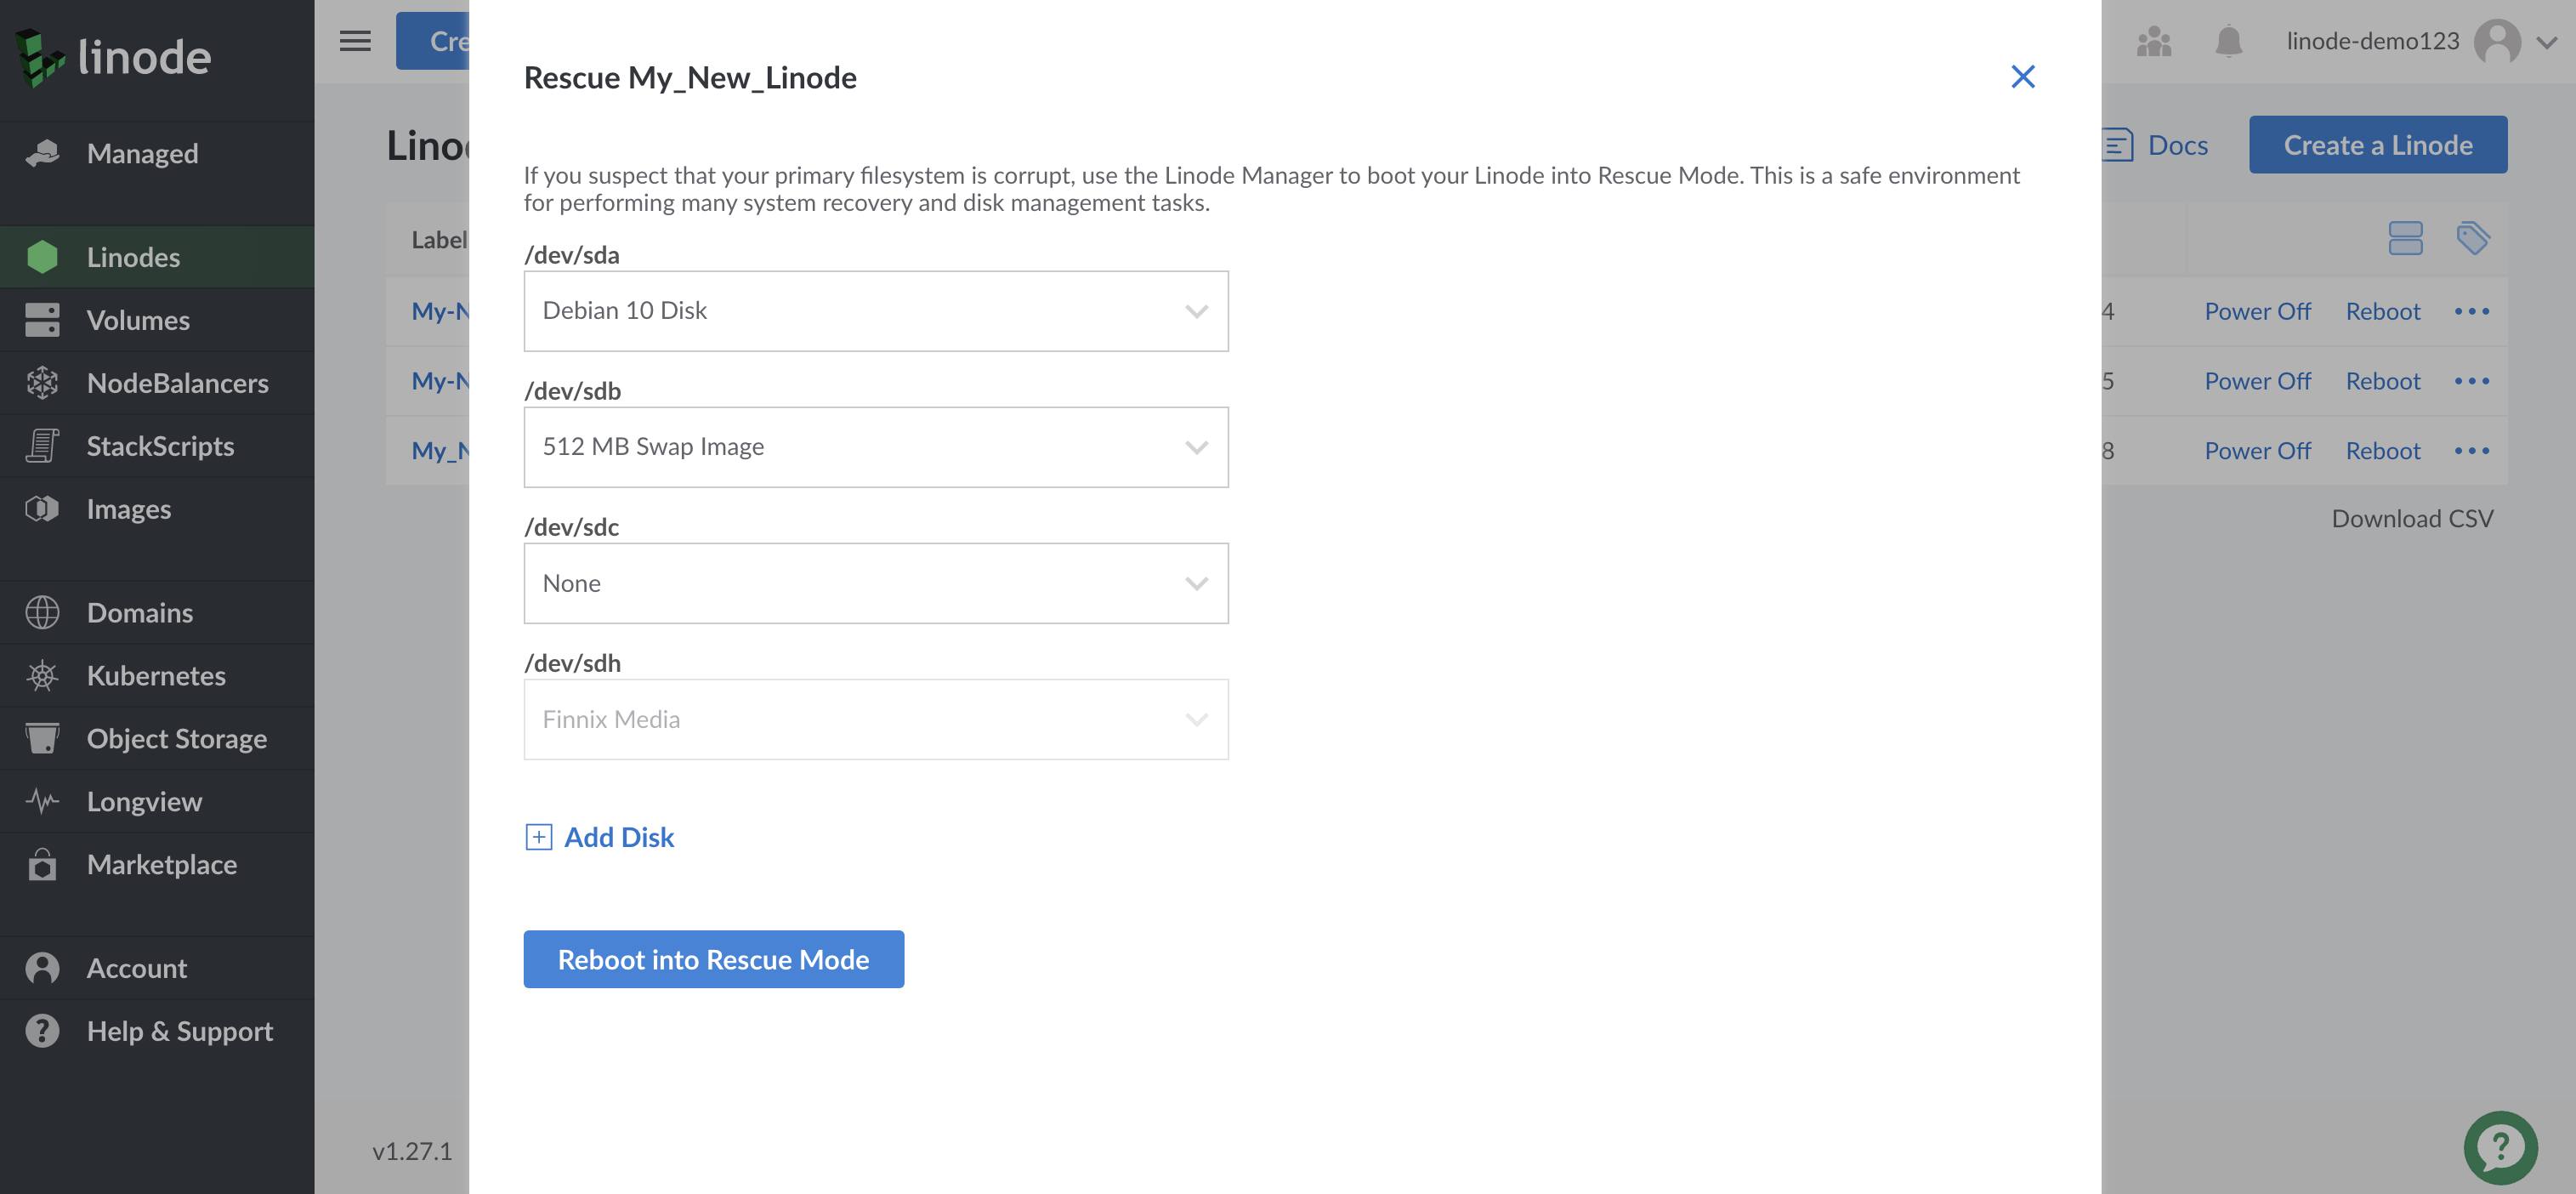 Cloud Manager Rescue form - /dev/sda highlighted